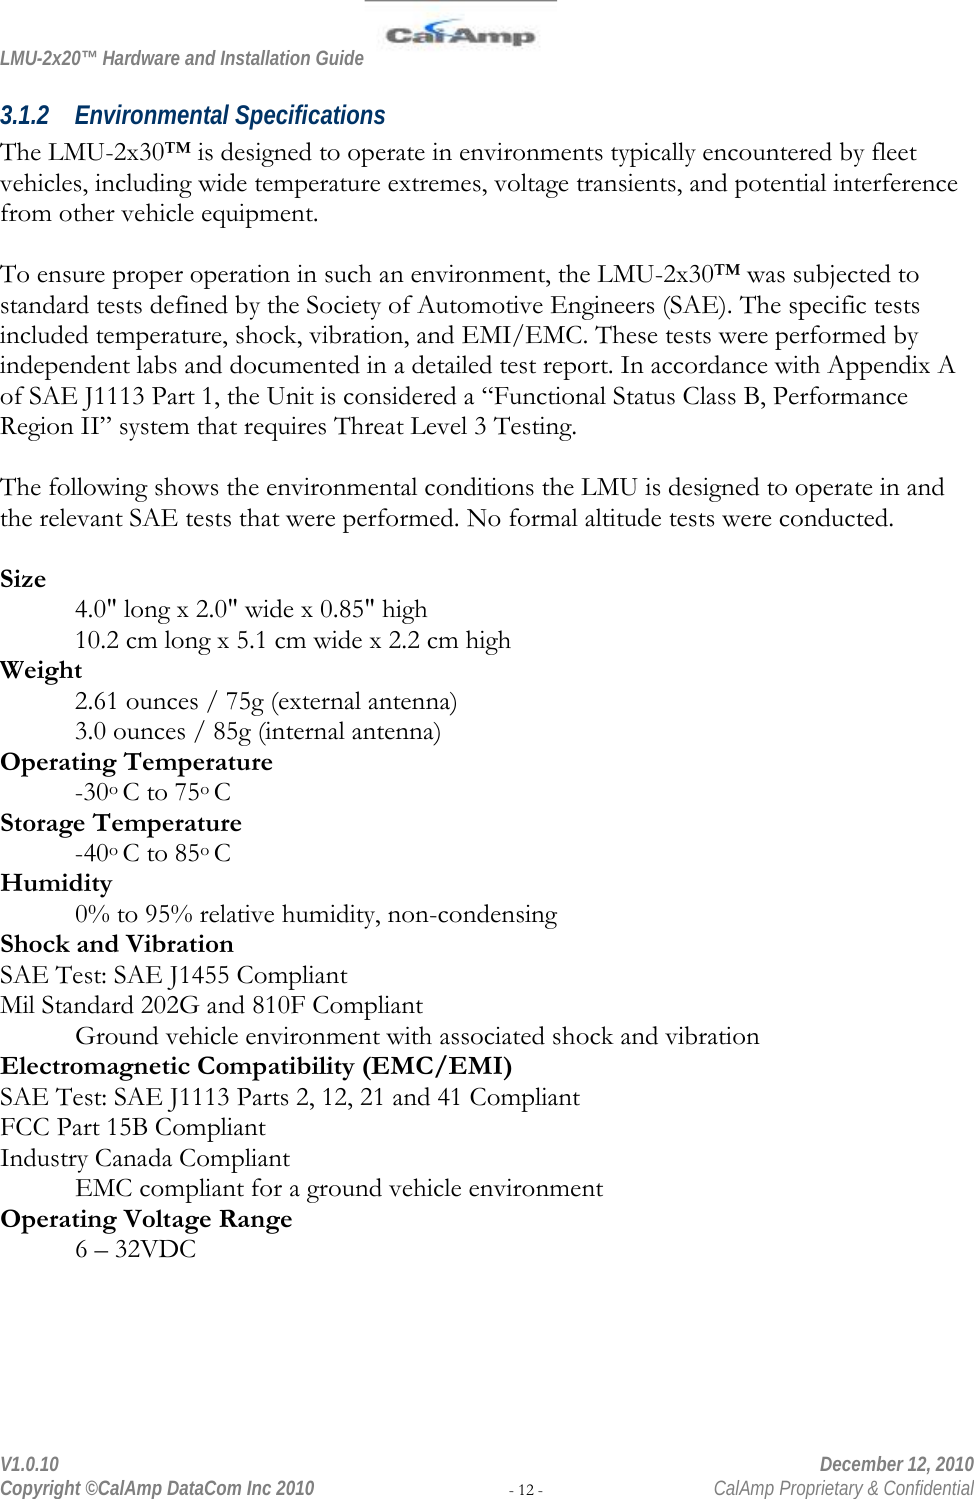 LMU-2x20™ Hardware and Installation Guide  V1.0.10    December 12, 2010 Copyright ©CalAmp DataCom Inc 2010 - 12 -  CalAmp Proprietary &amp; Confidential 3.1.2 Environmental Specifications The LMU-2x30™ is designed to operate in environments typically encountered by fleet vehicles, including wide temperature extremes, voltage transients, and potential interference from other vehicle equipment.   To ensure proper operation in such an environment, the LMU-2x30™ was subjected to standard tests defined by the Society of Automotive Engineers (SAE). The specific tests included temperature, shock, vibration, and EMI/EMC. These tests were performed by independent labs and documented in a detailed test report. In accordance with Appendix A of SAE J1113 Part 1, the Unit is considered a “Functional Status Class B, Performance Region II” system that requires Threat Level 3 Testing.   The following shows the environmental conditions the LMU is designed to operate in and the relevant SAE tests that were performed. No formal altitude tests were conducted.  Size 4.0&quot; long x 2.0&quot; wide x 0.85&quot; high 10.2 cm long x 5.1 cm wide x 2.2 cm high Weight 2.61 ounces / 75g (external antenna) 3.0 ounces / 85g (internal antenna) Operating Temperature -30o C to 75o C Storage Temperature  -40o C to 85o C Humidity 0% to 95% relative humidity, non-condensing Shock and Vibration SAE Test: SAE J1455 Compliant Mil Standard 202G and 810F Compliant Ground vehicle environment with associated shock and vibration Electromagnetic Compatibility (EMC/EMI) SAE Test: SAE J1113 Parts 2, 12, 21 and 41 Compliant FCC Part 15B Compliant Industry Canada Compliant EMC compliant for a ground vehicle environment Operating Voltage Range 6 – 32VDC 